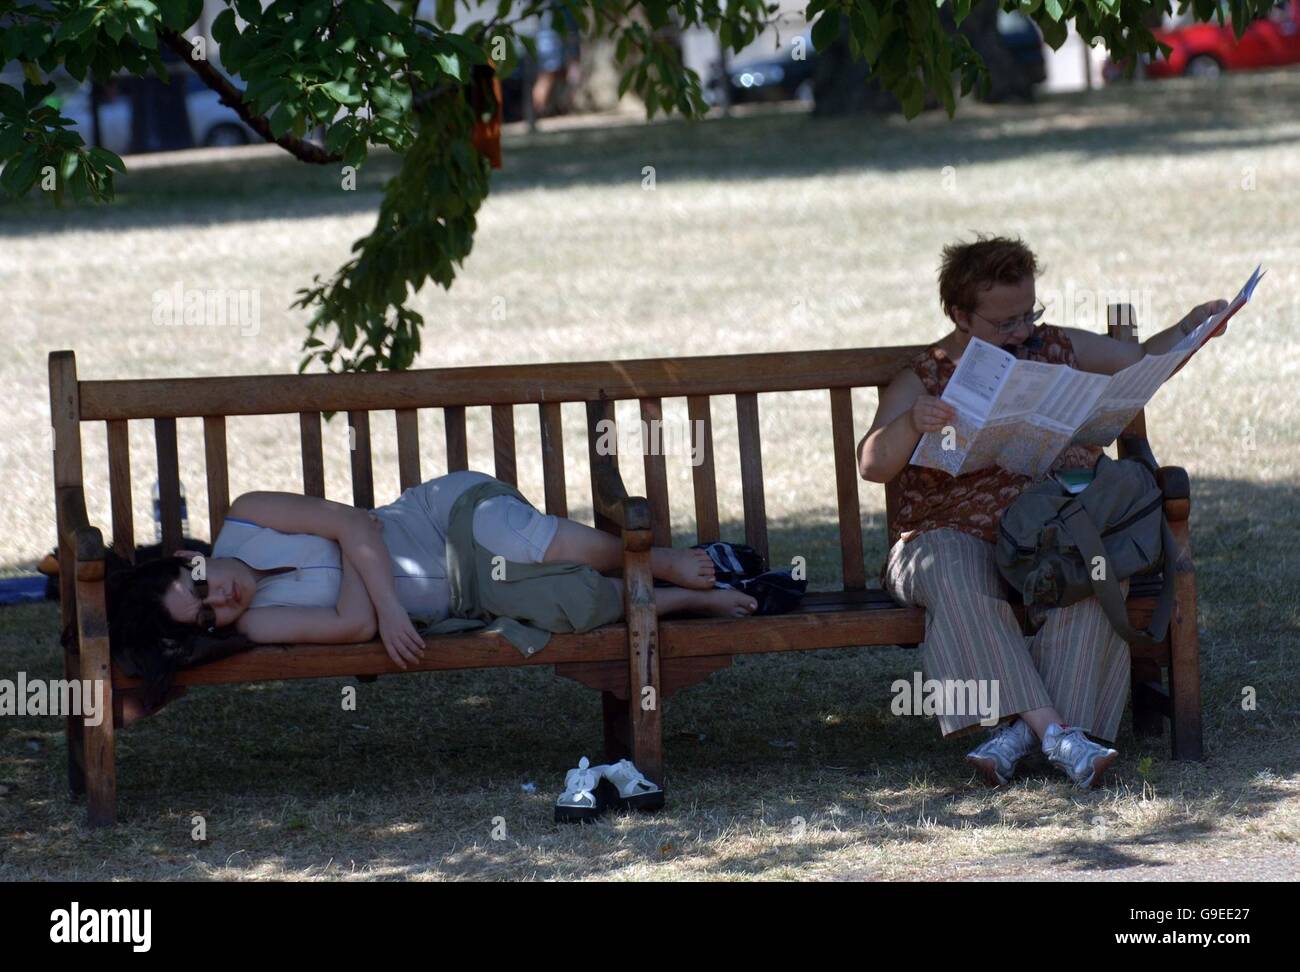 People in shade at London's St James' park during the current hot spell when temperatures are expected to peak tomorrow (Wed). Stock Photo